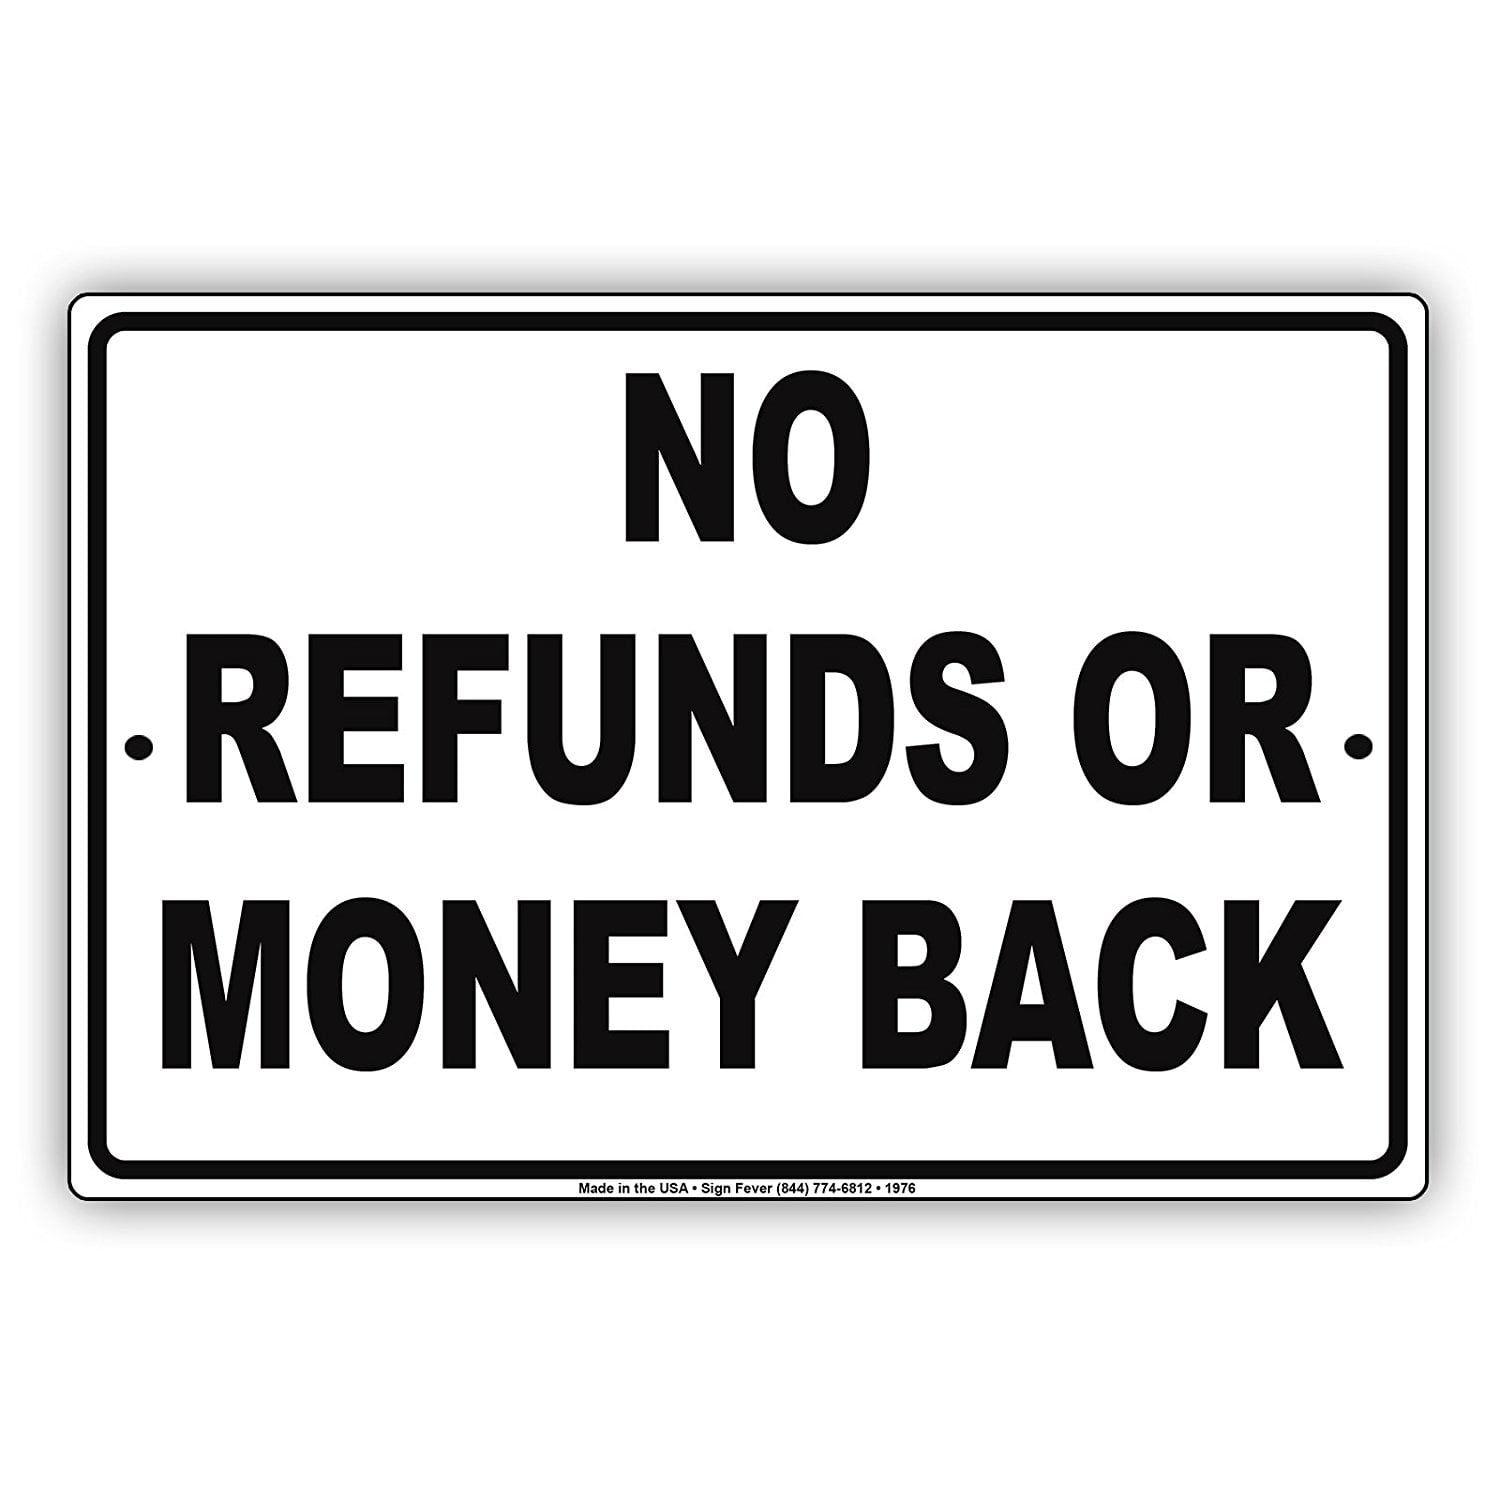 no-refunds-or-money-back-store-sales-buying-rules-restrictions-alert